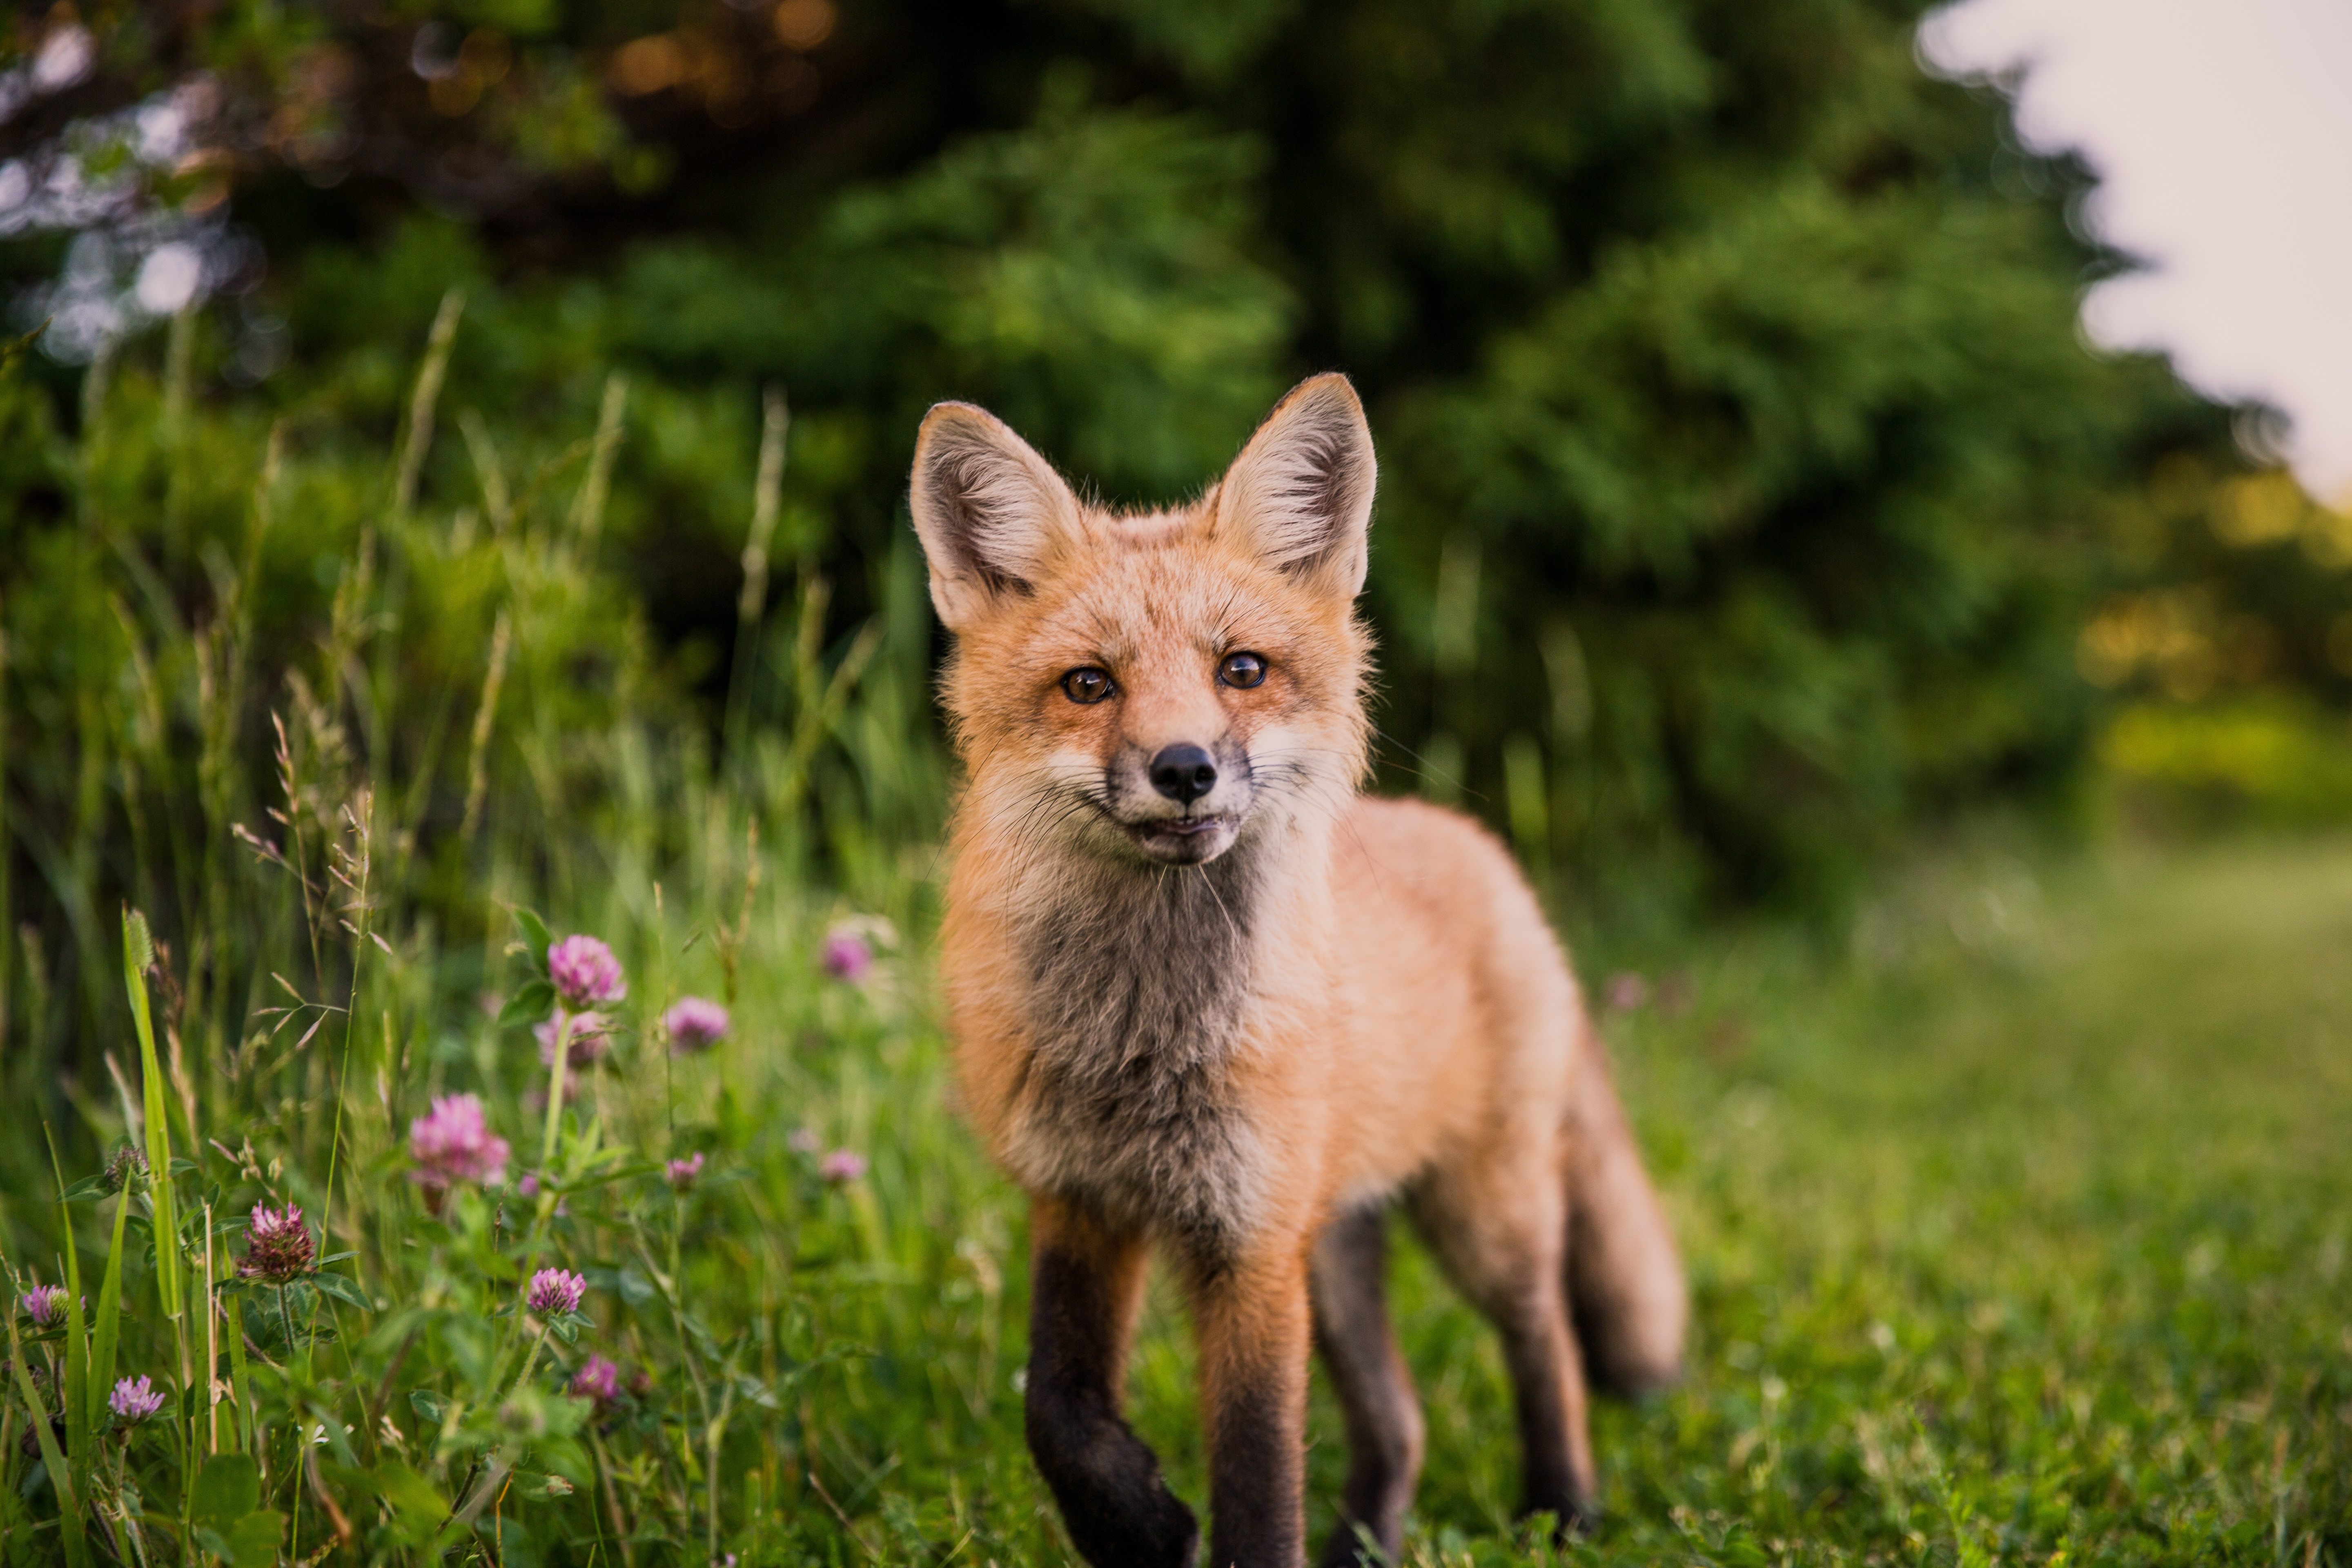 83007 download wallpaper animals, grass, fox, muzzle, sight, opinion, wildlife screensavers and pictures for free